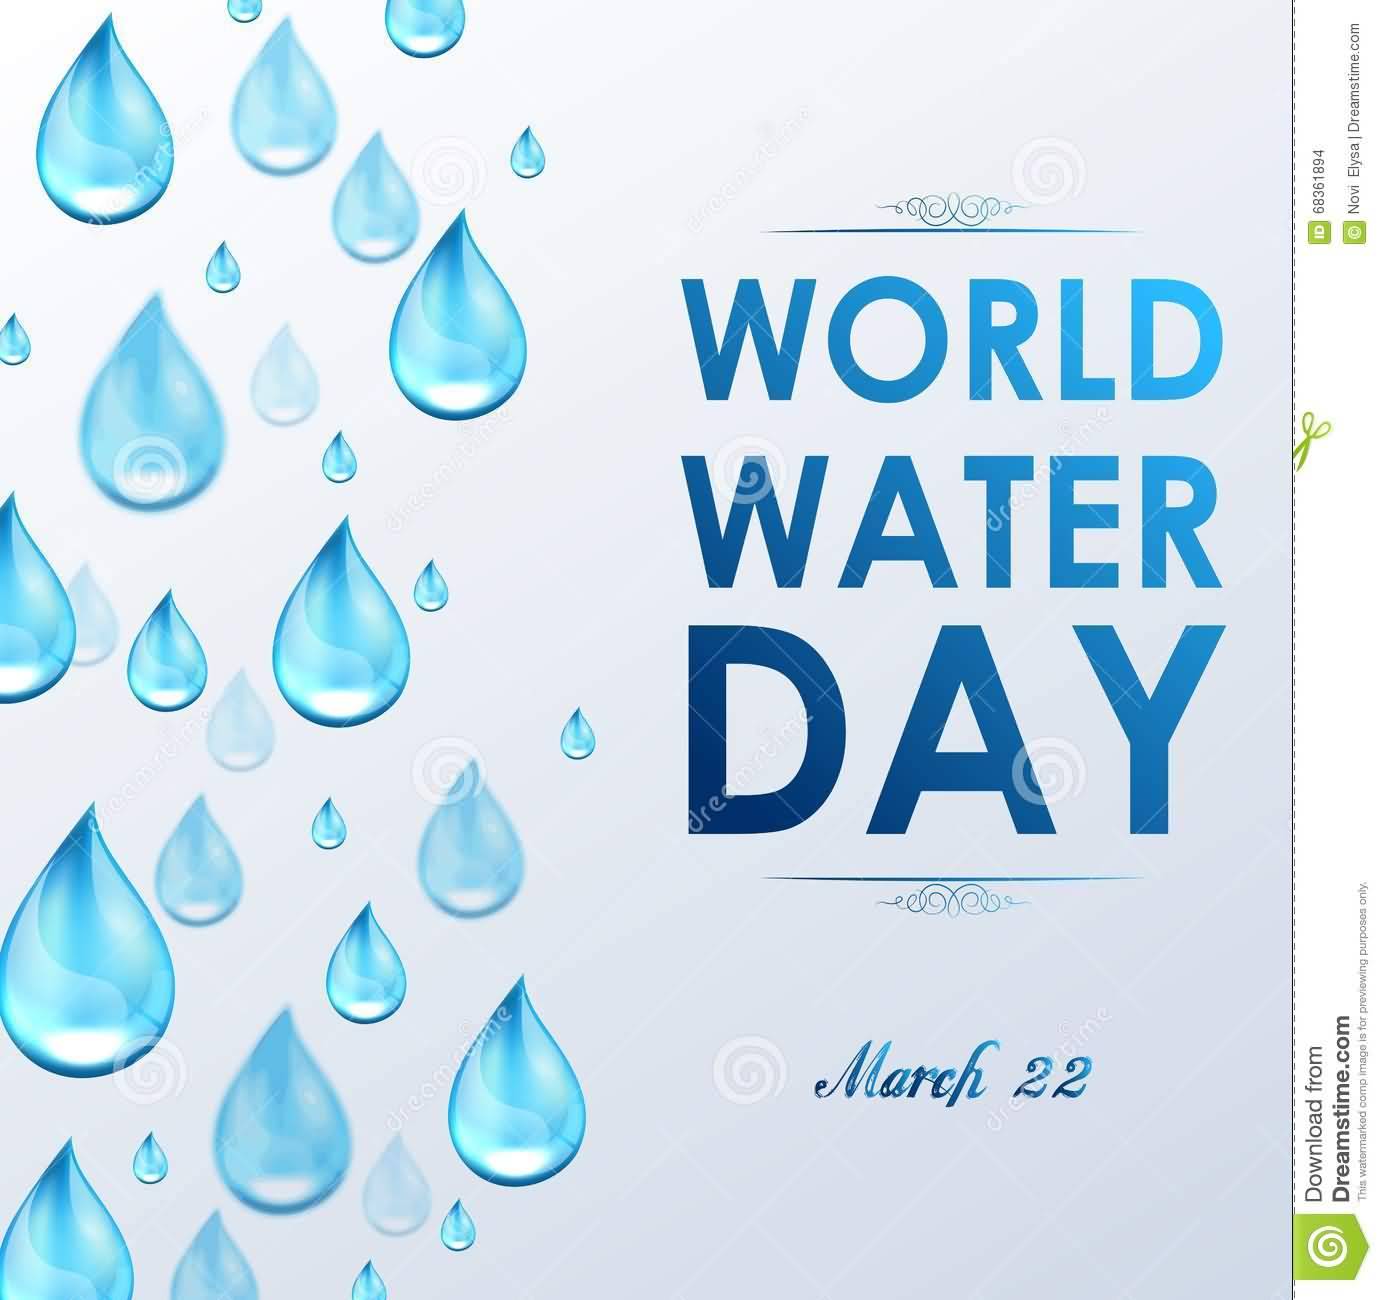 World Water Day March 22 Illustration